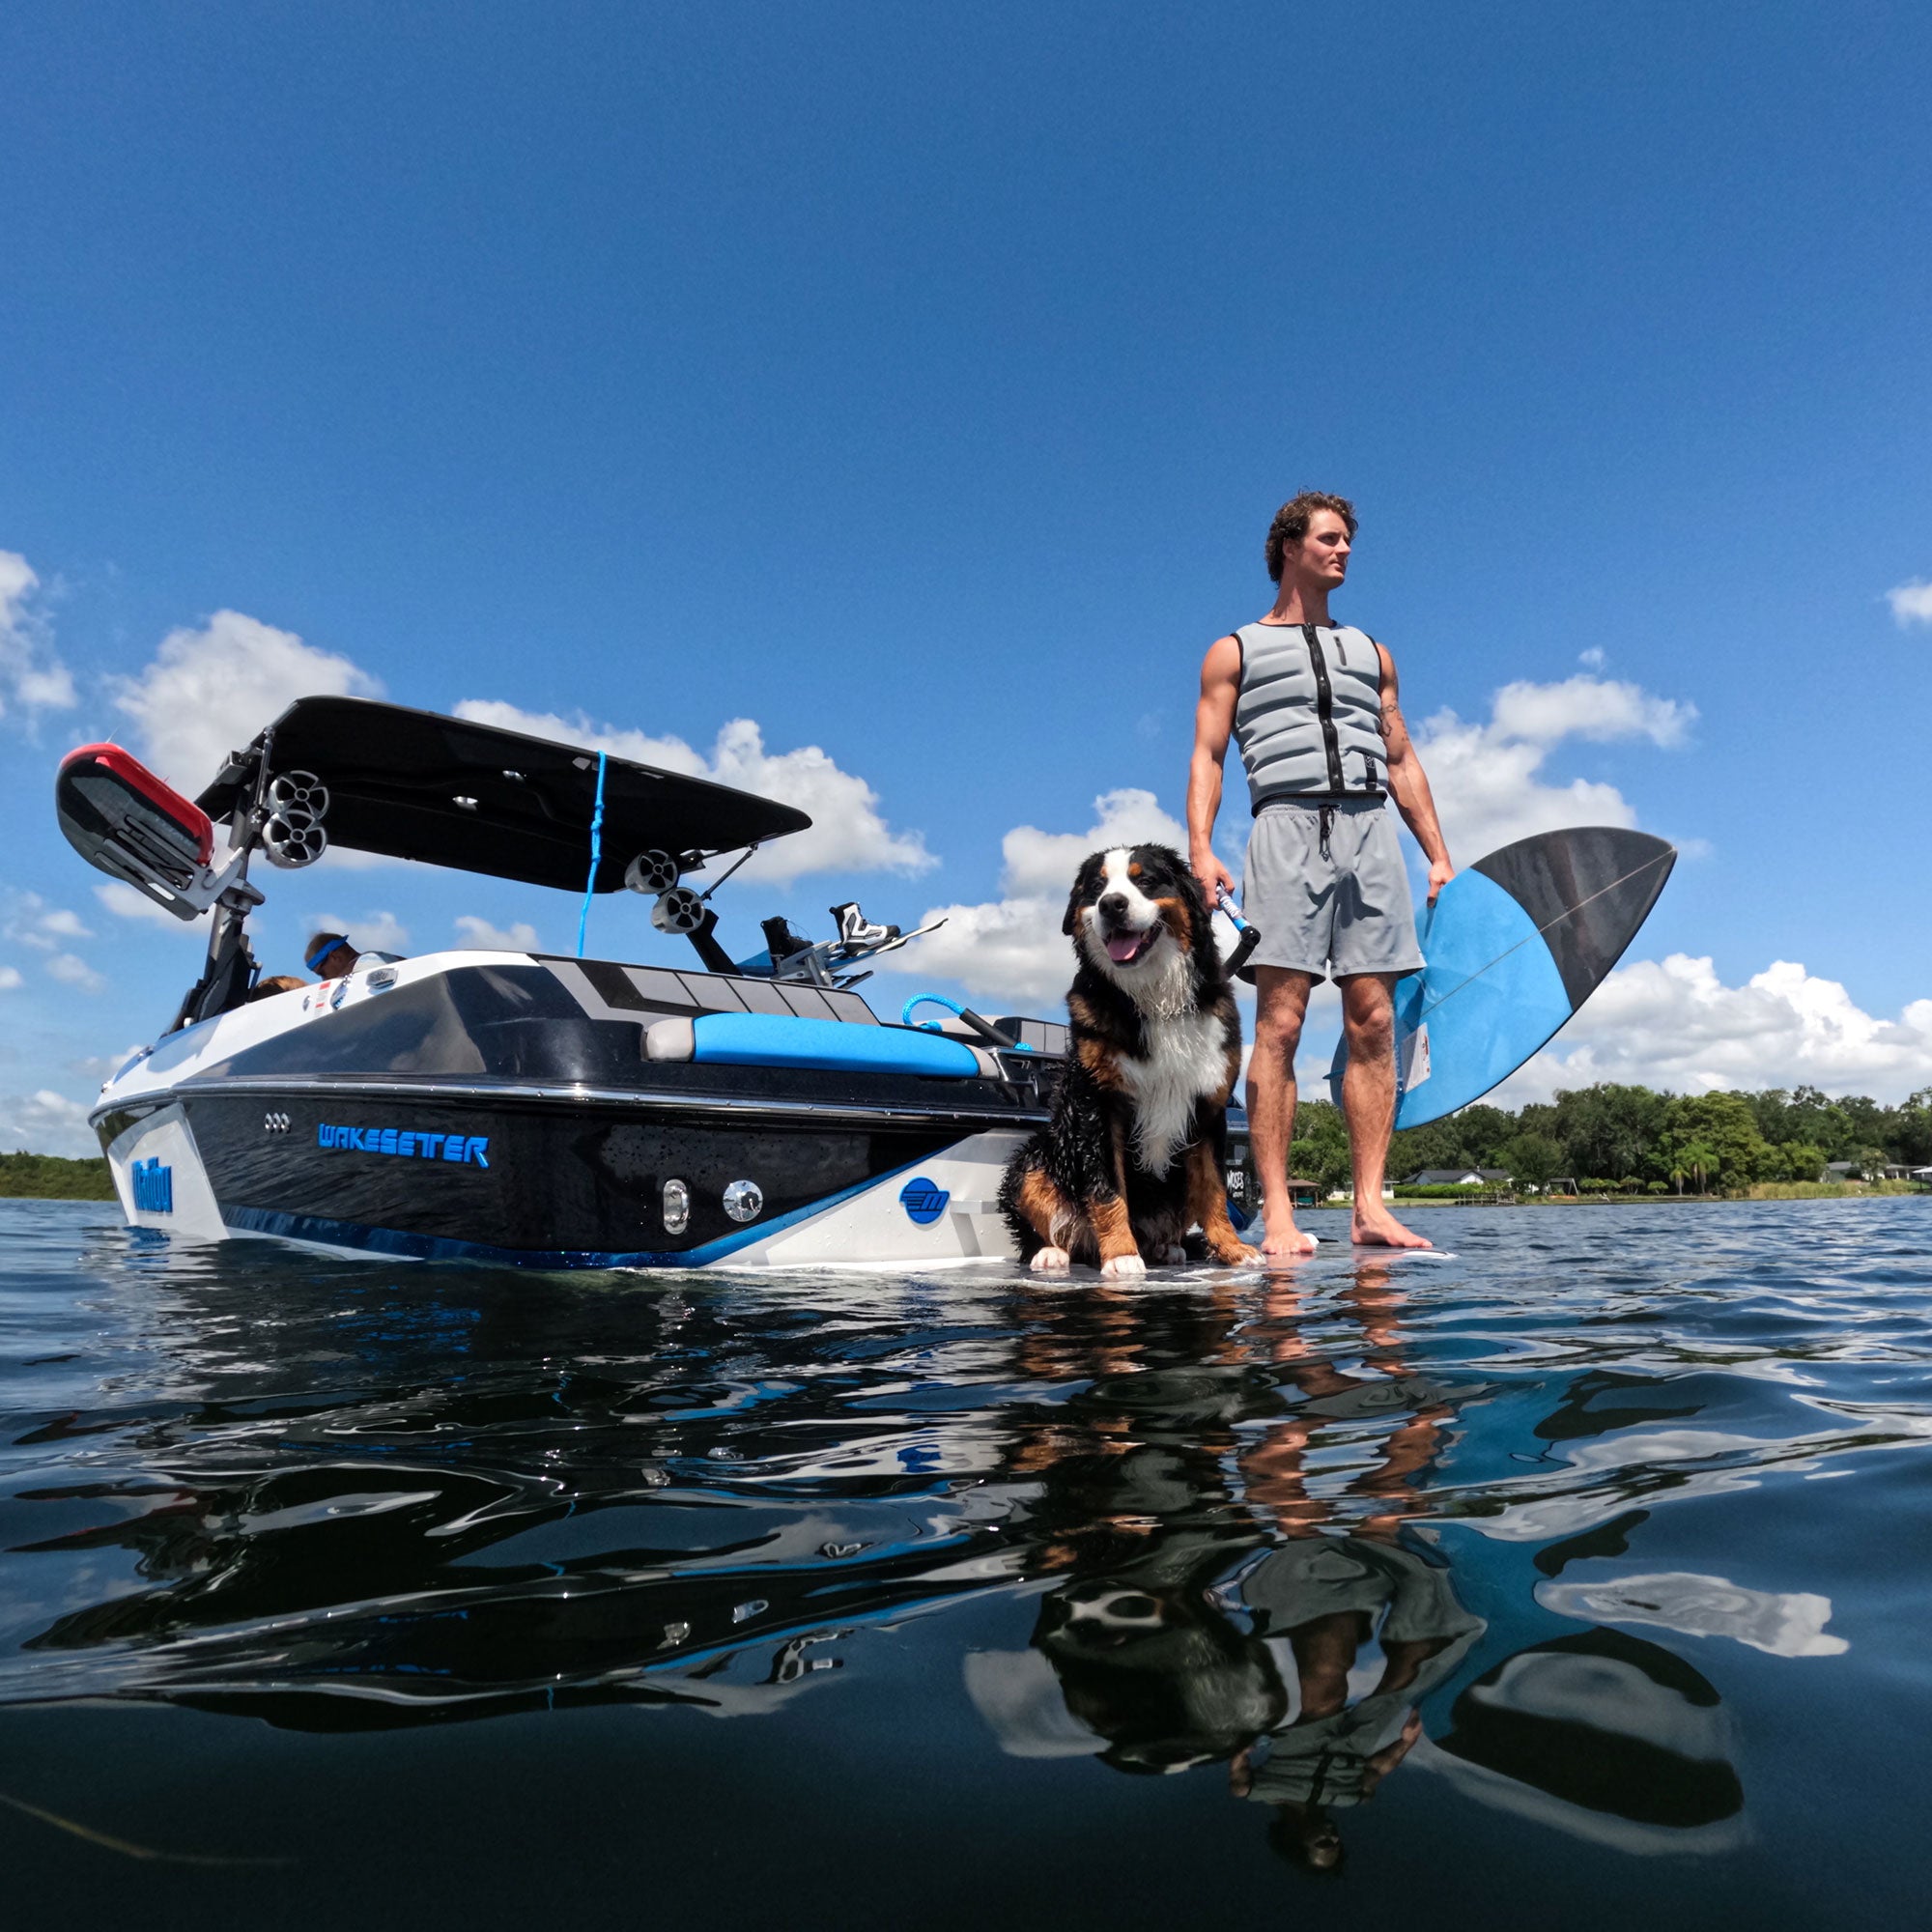 A man and his dog standing on a SWELL Wakesurf boat in the water.